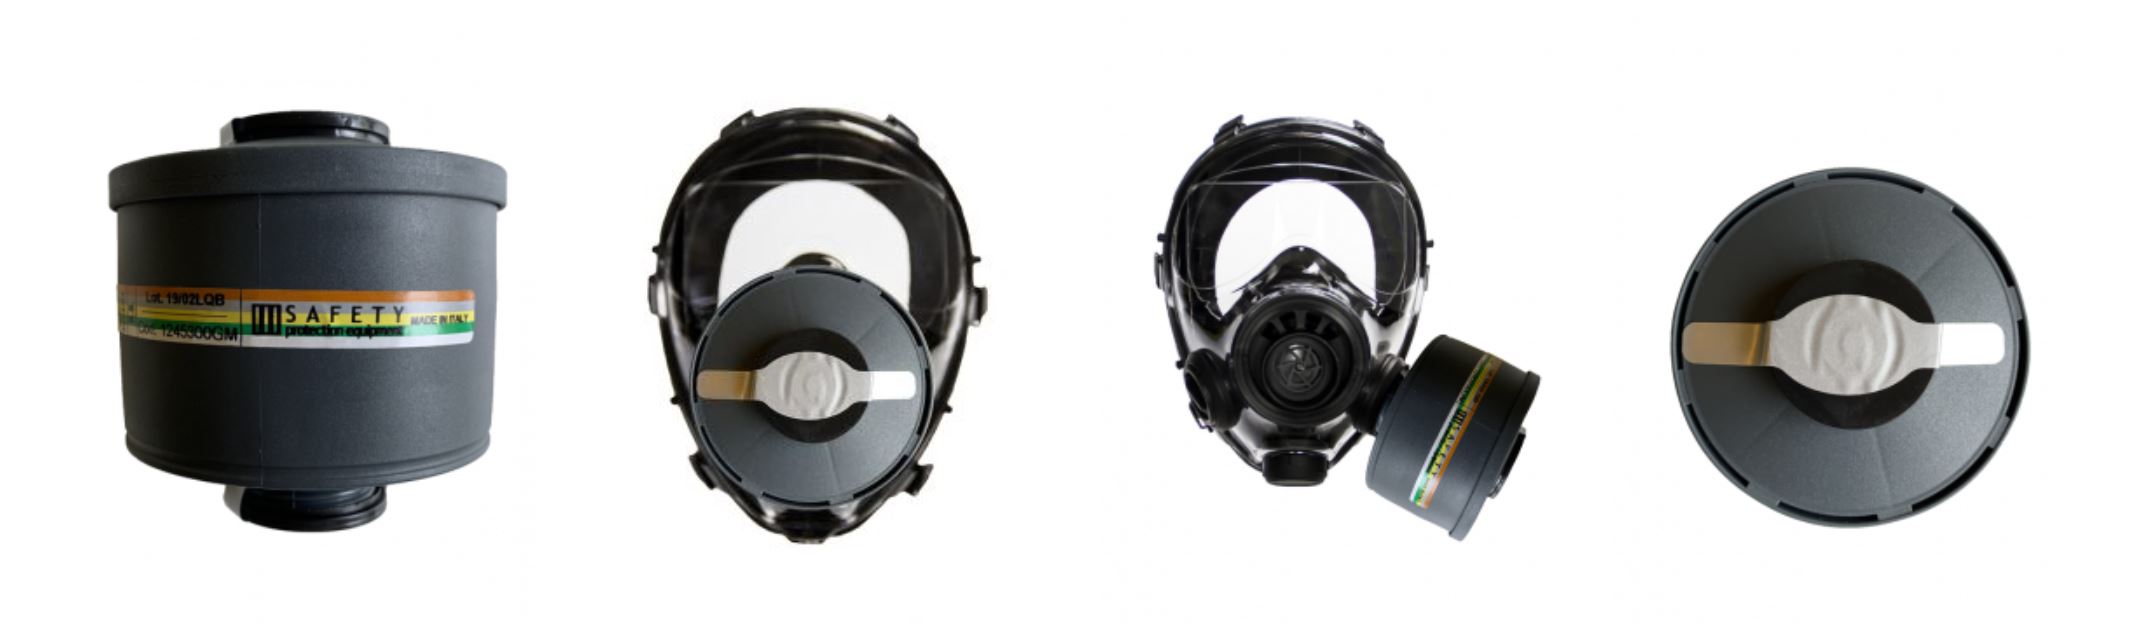 Mestel GasMask FILTER | (works with MIRA) Nuclear, Bio, Chemical, Smoke, Radiological